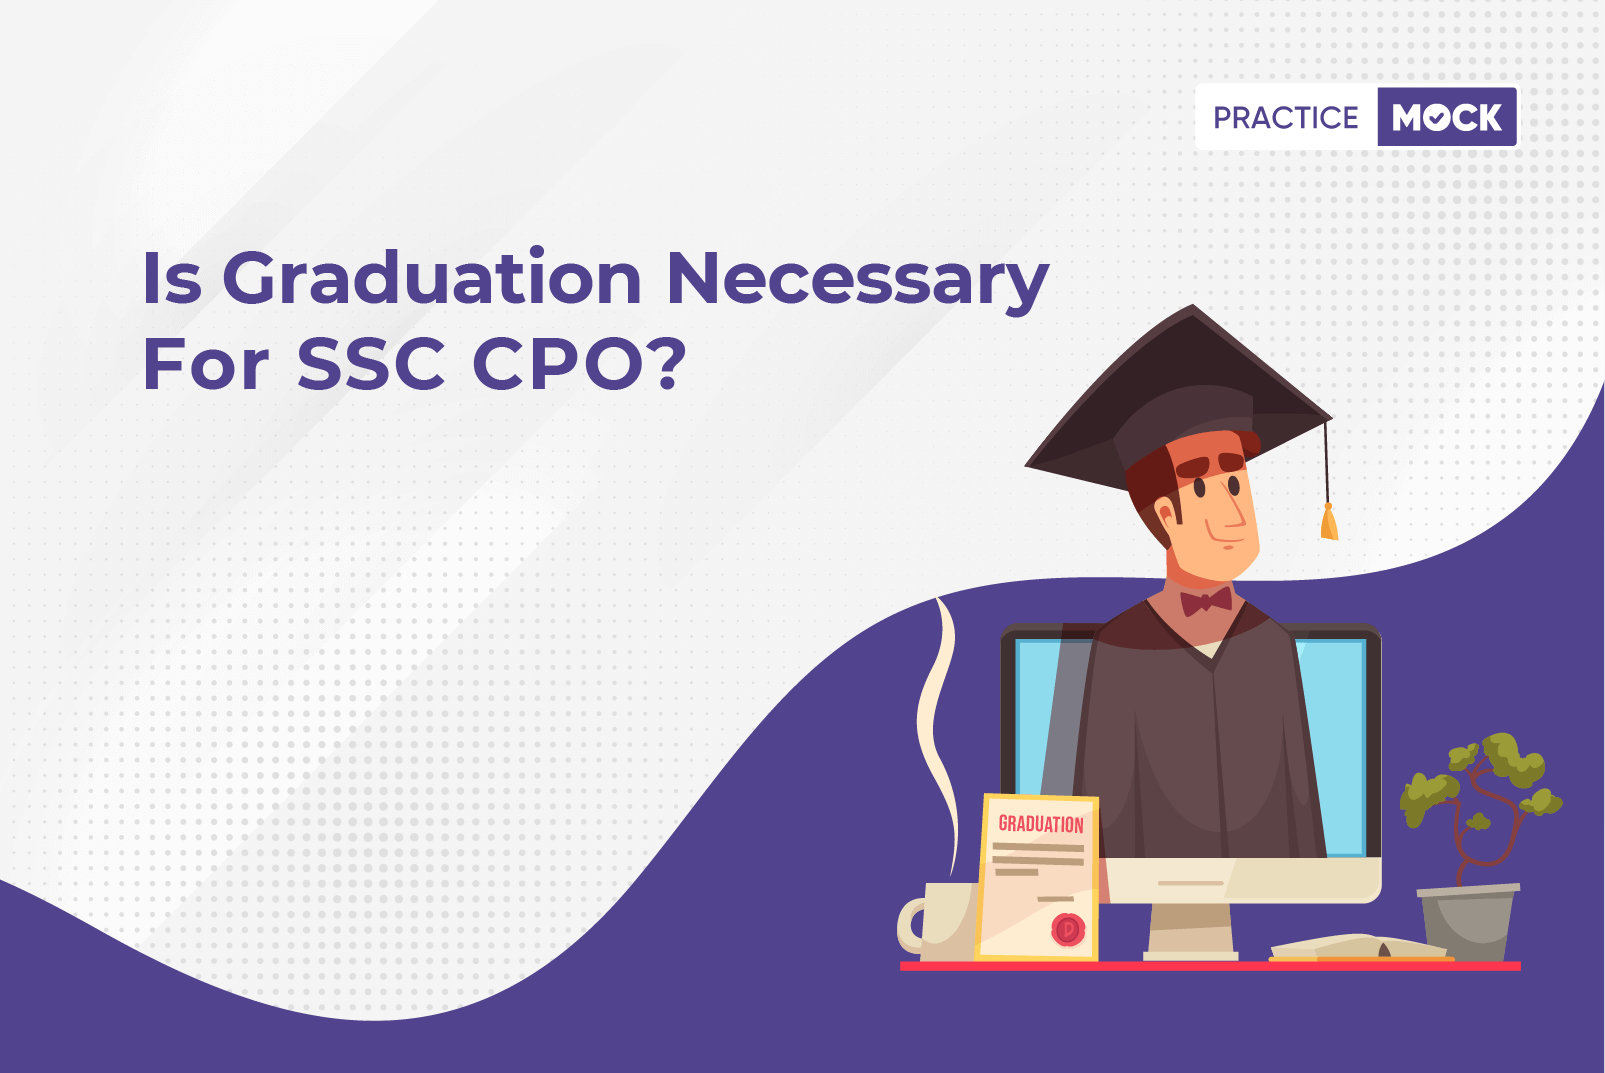 What is the Minimum Education Qualification required to apply for SSC CPO Exam?